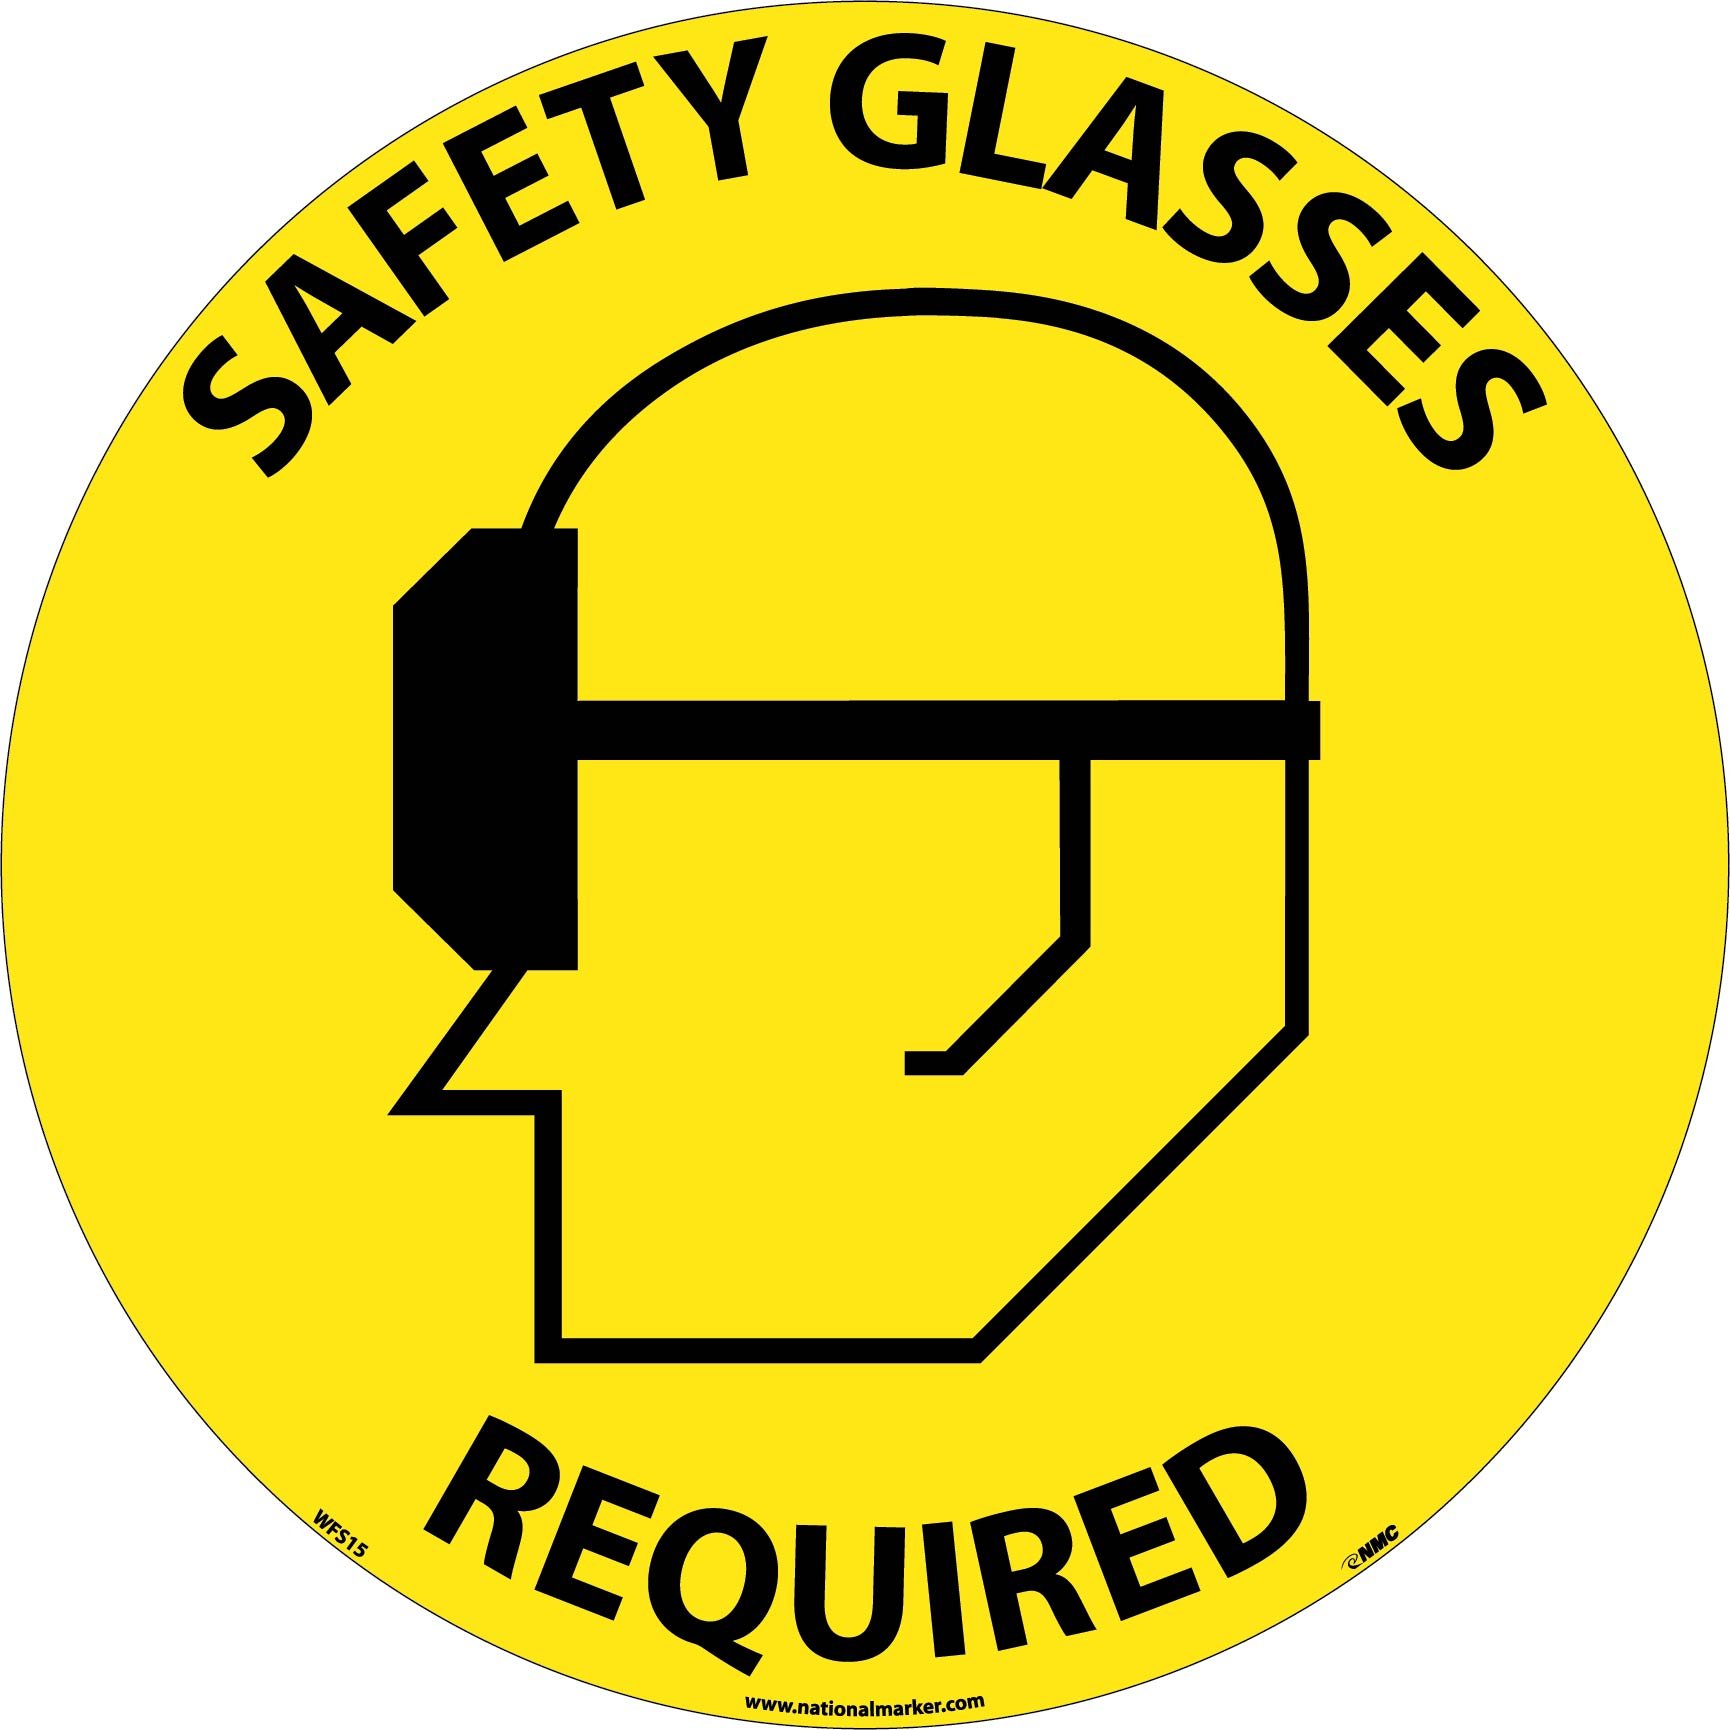 Safety Glasses Clip Art - Cliparts and Others Art Inspiration